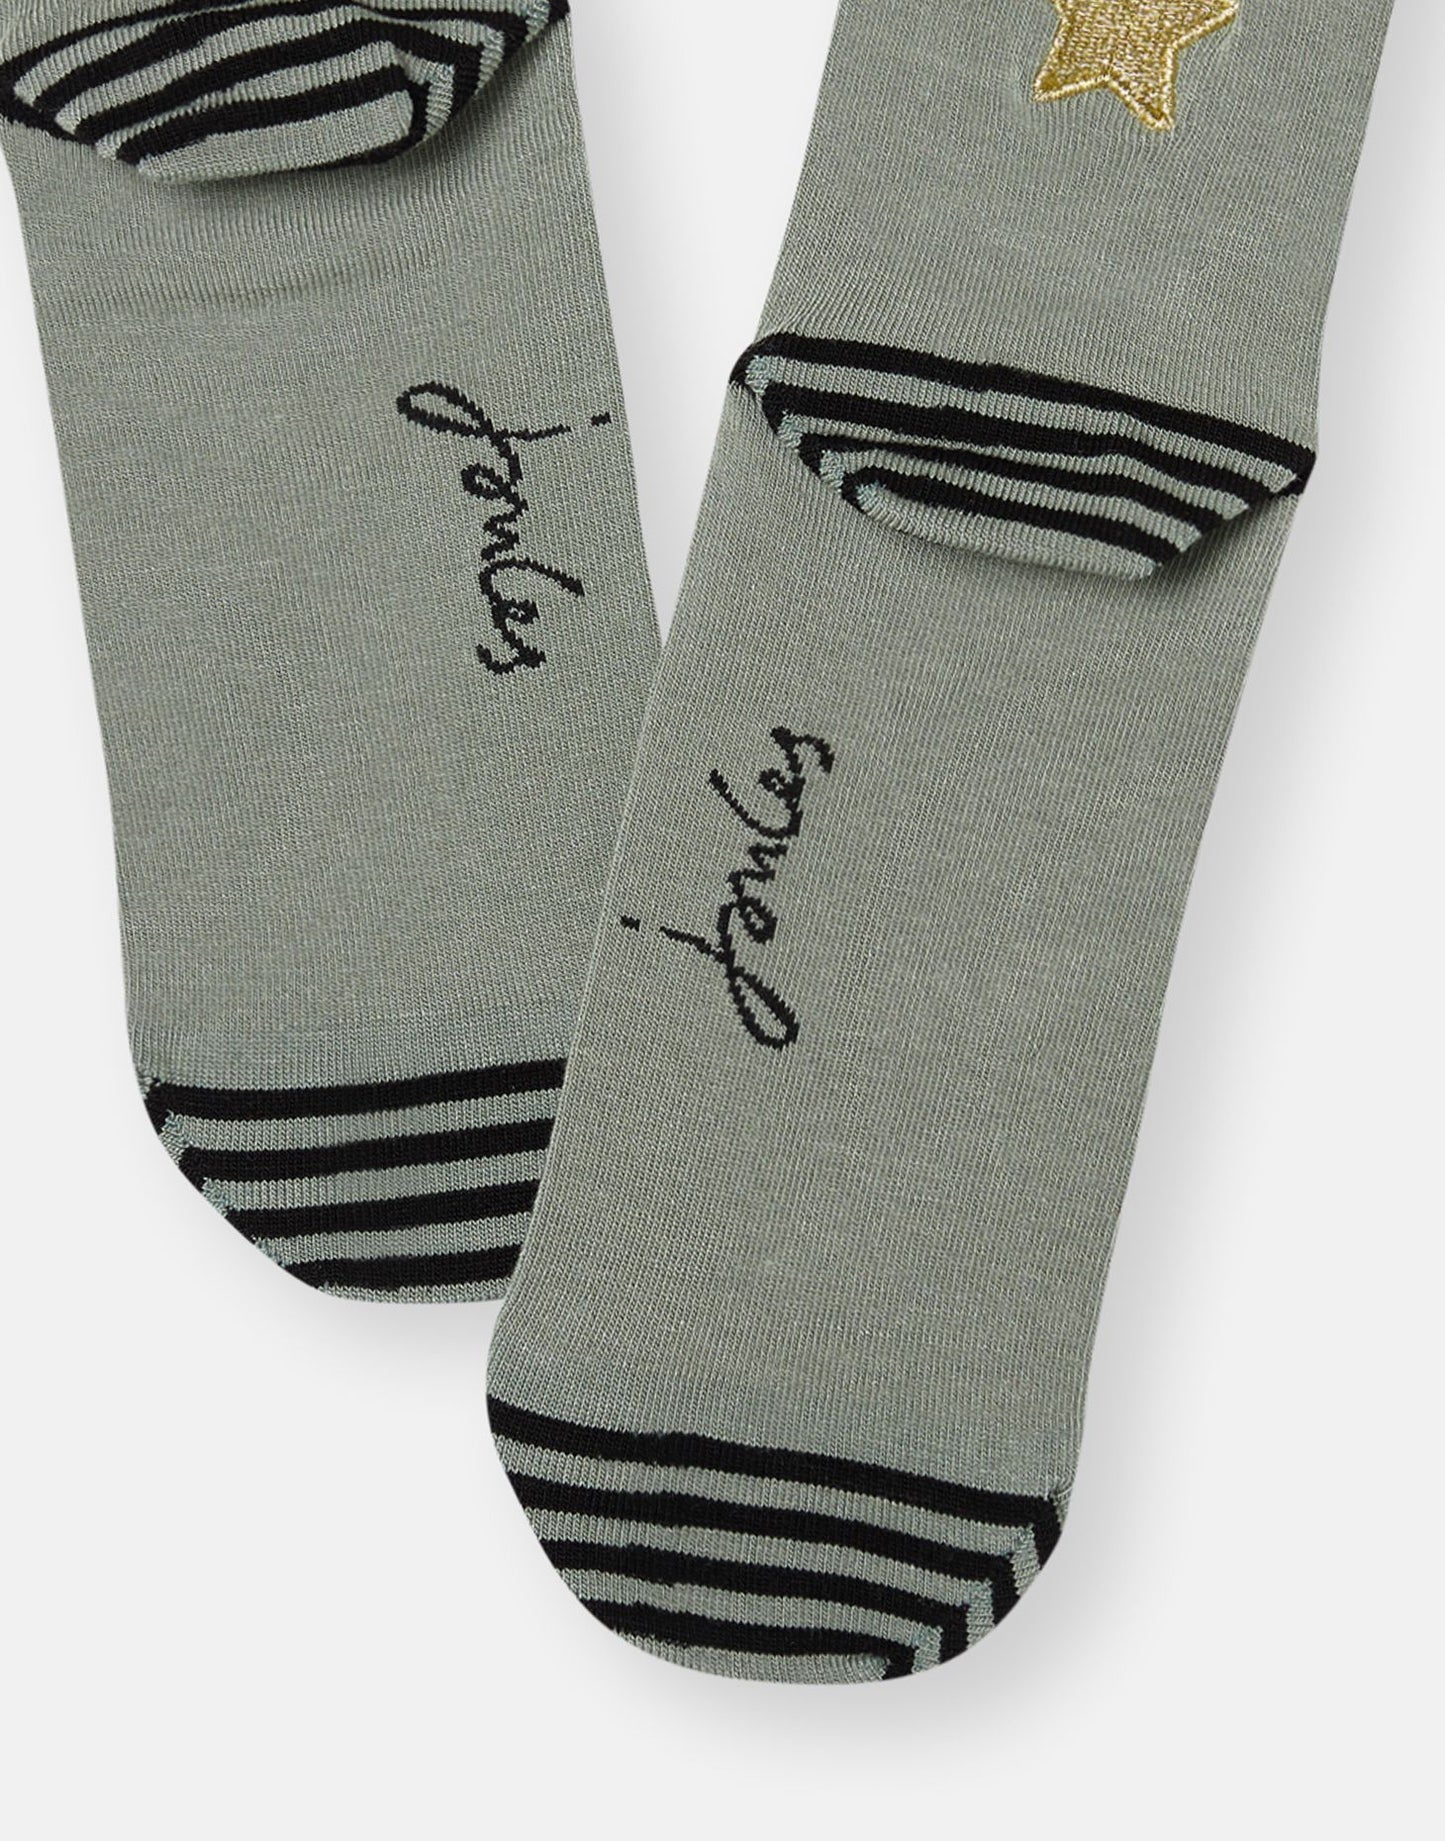 Joules Brill Bamboo Embroidered Socks SS21